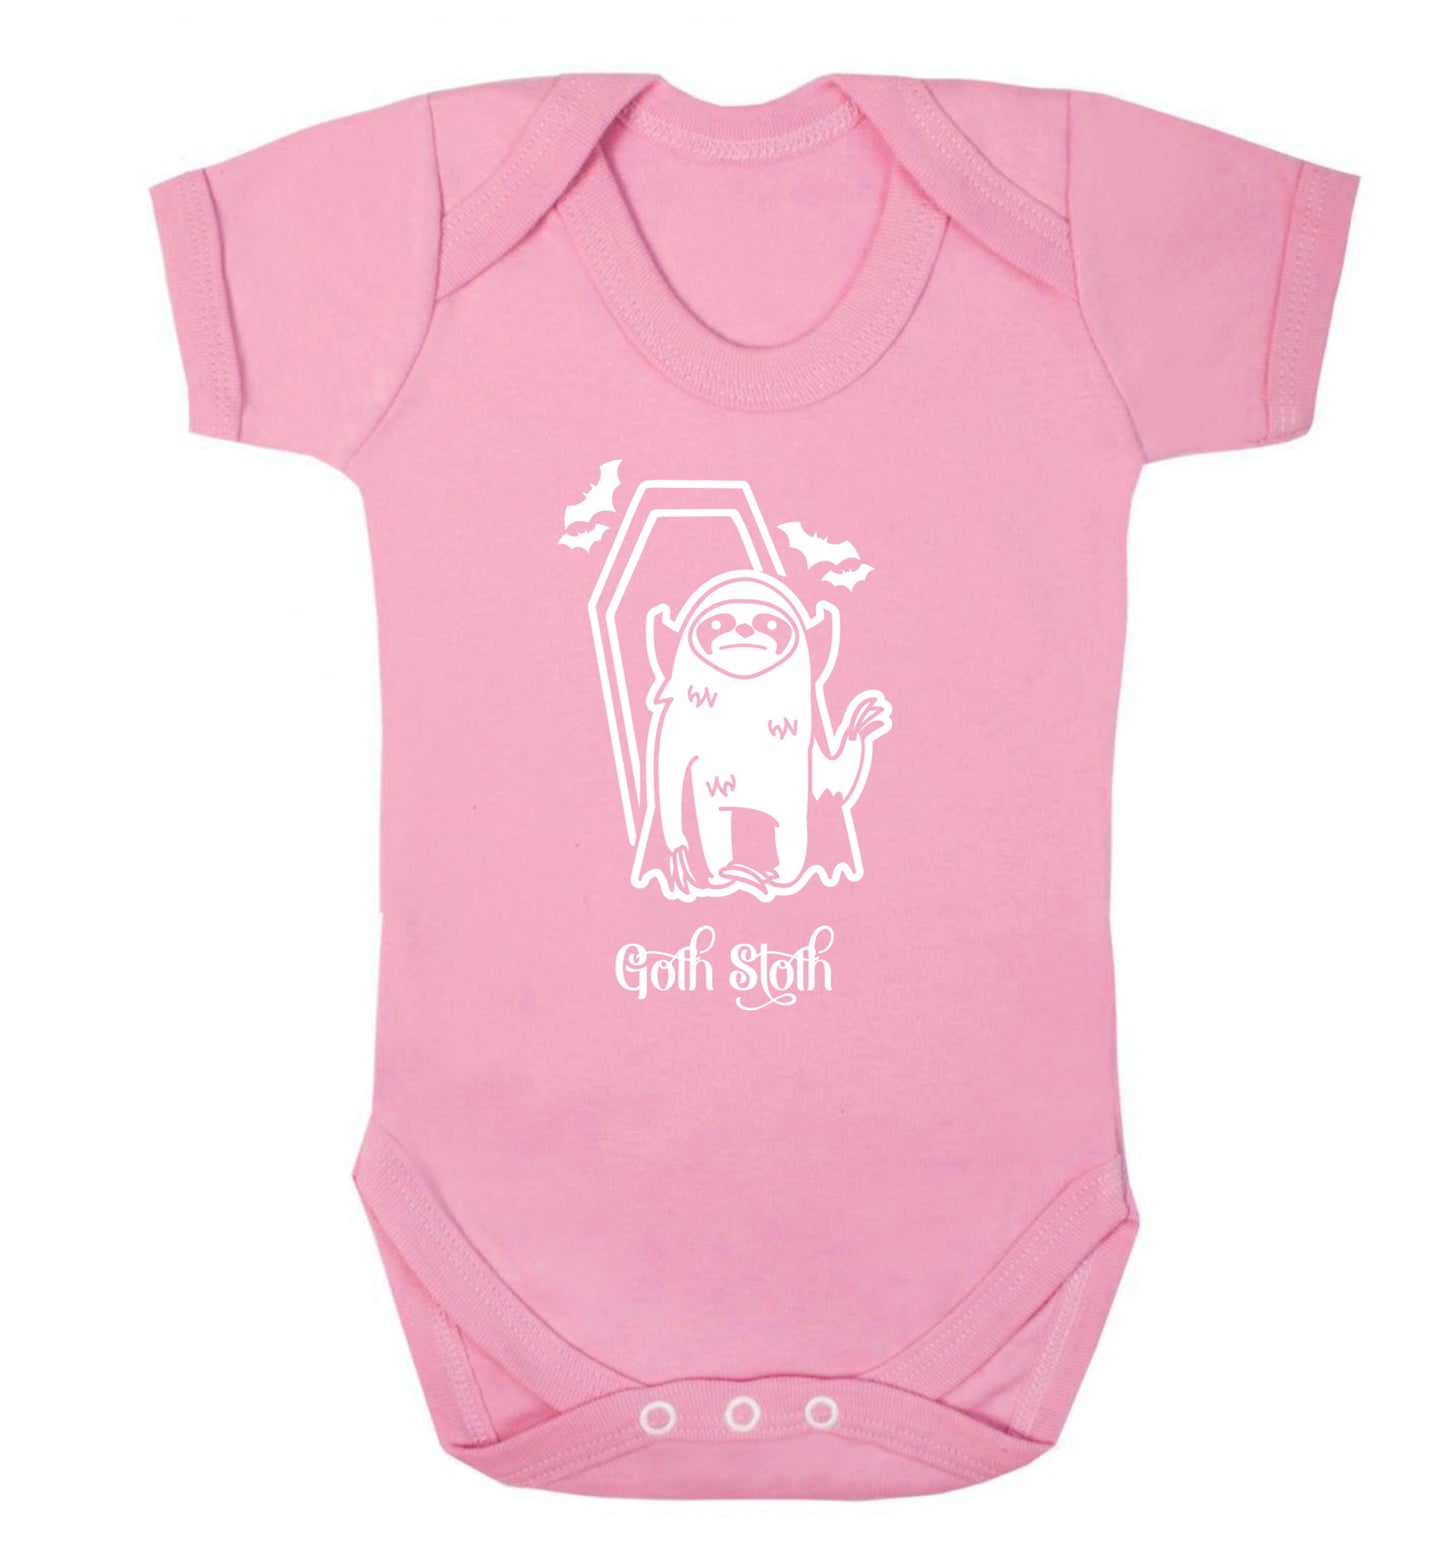 Goth Sloth Baby Vest pale pink 18-24 months